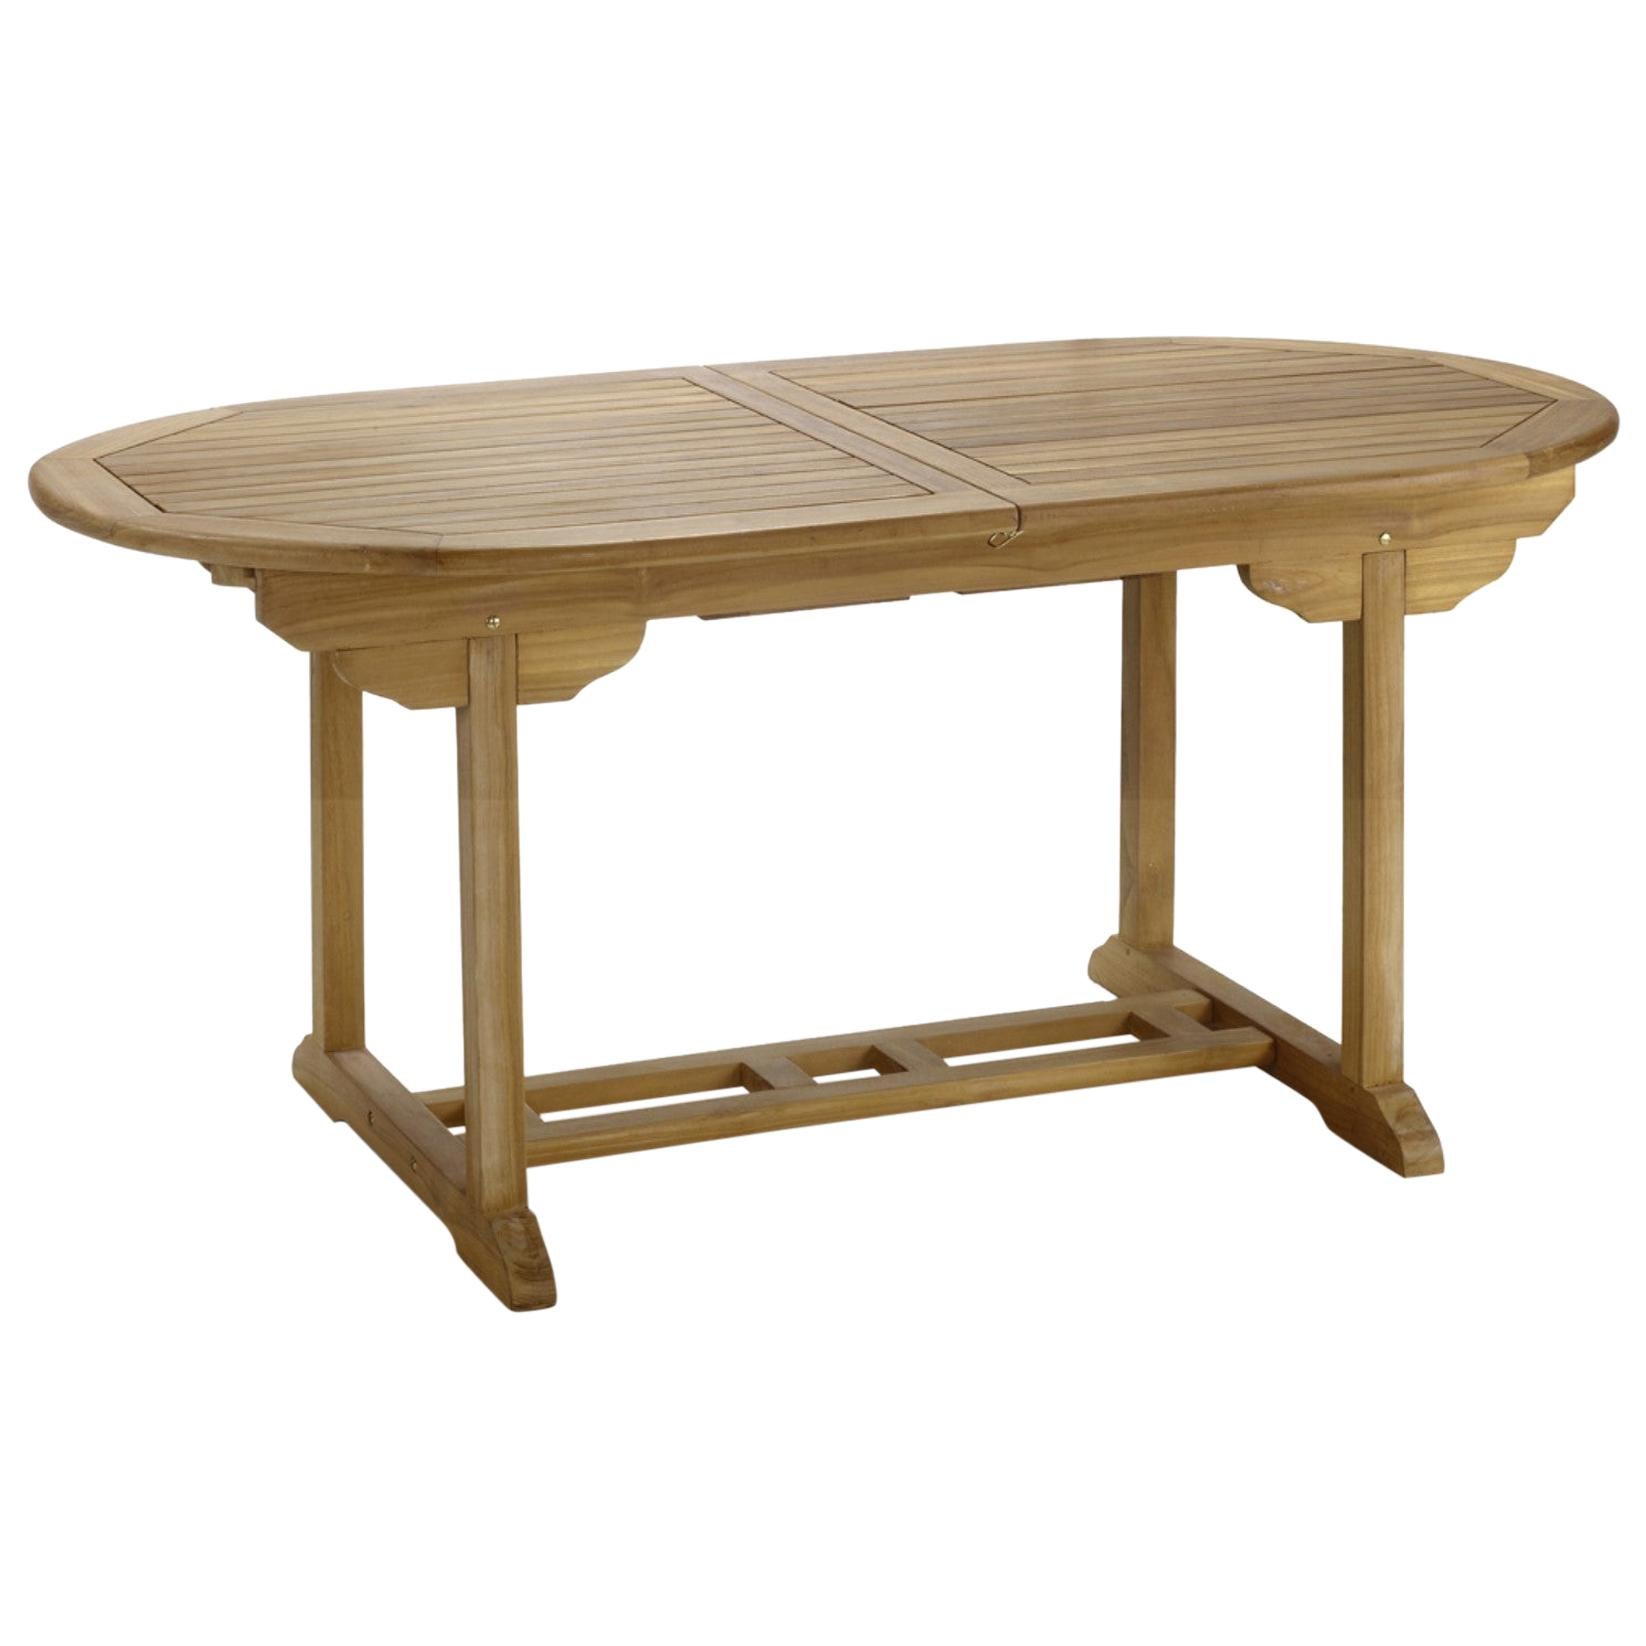 New Teak Oval Foldable Dining Table, Indoor and Outdoor